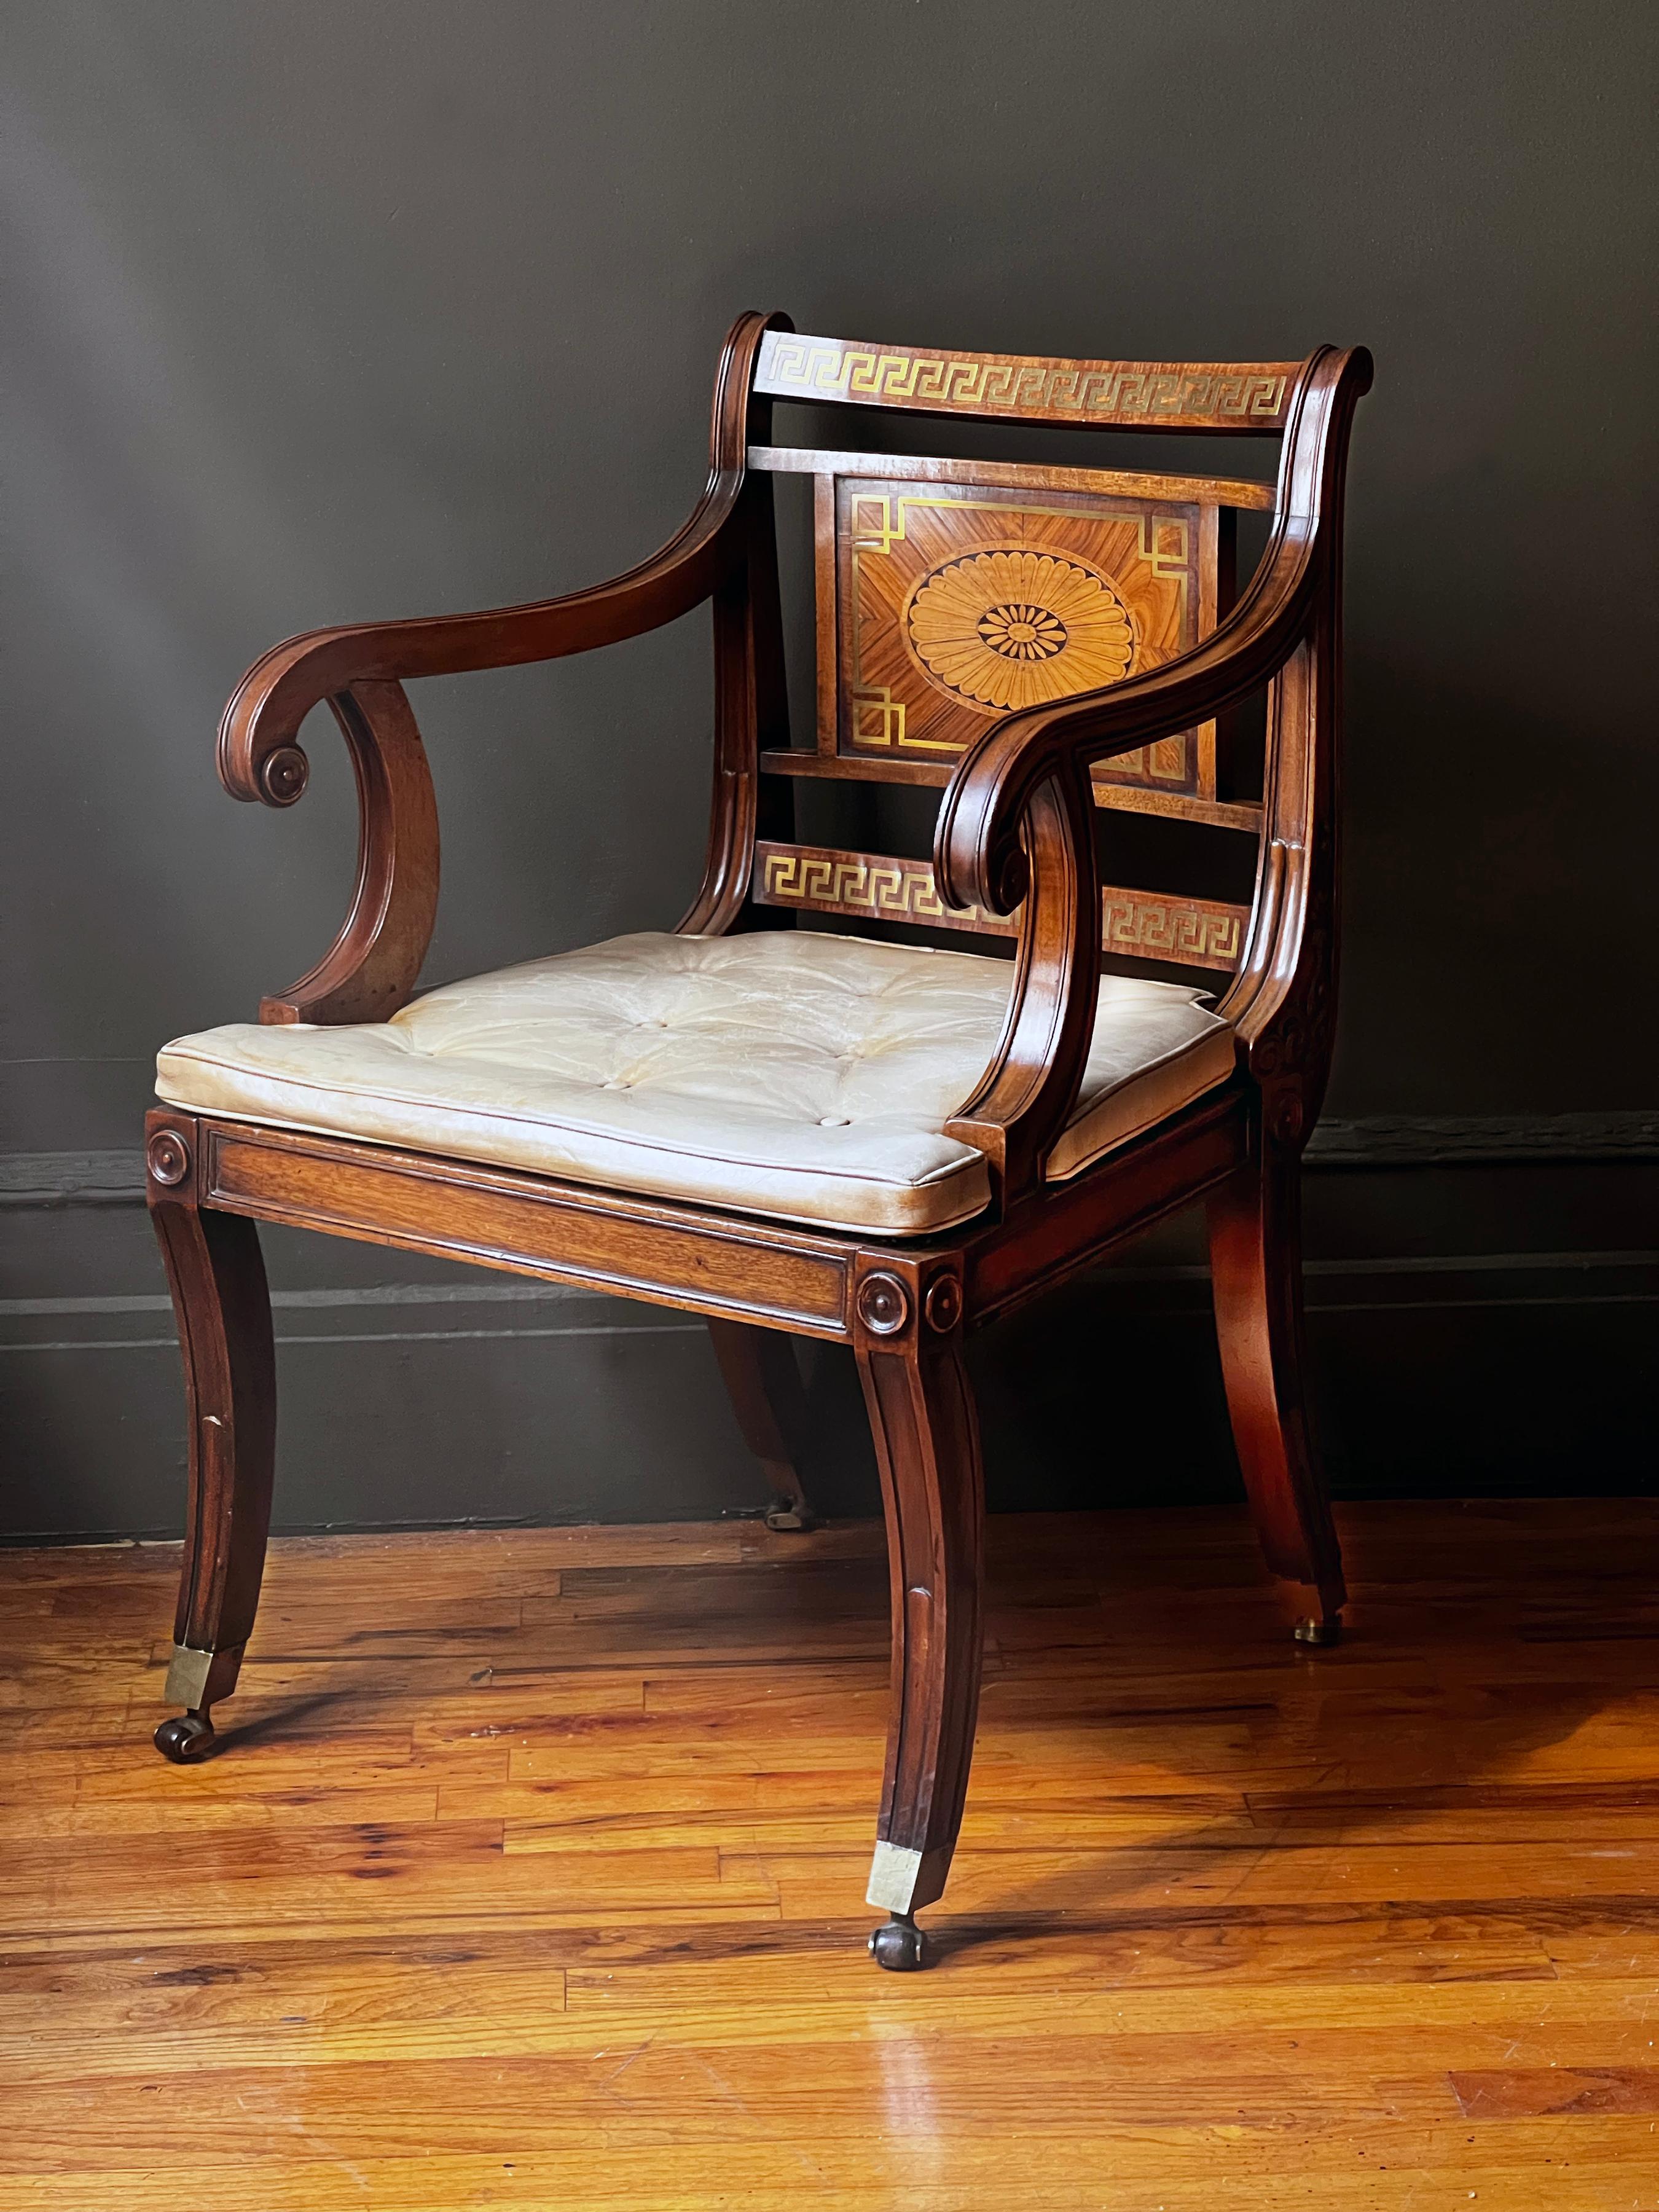 A handsome Regency style brass inlaid mahogany armchair with rosewood, satinwood and kingwood veneers, having paterae inlaid back panels over caned seat with leather upholstered squab cushions, standing on saber legs ending in box casters. England,